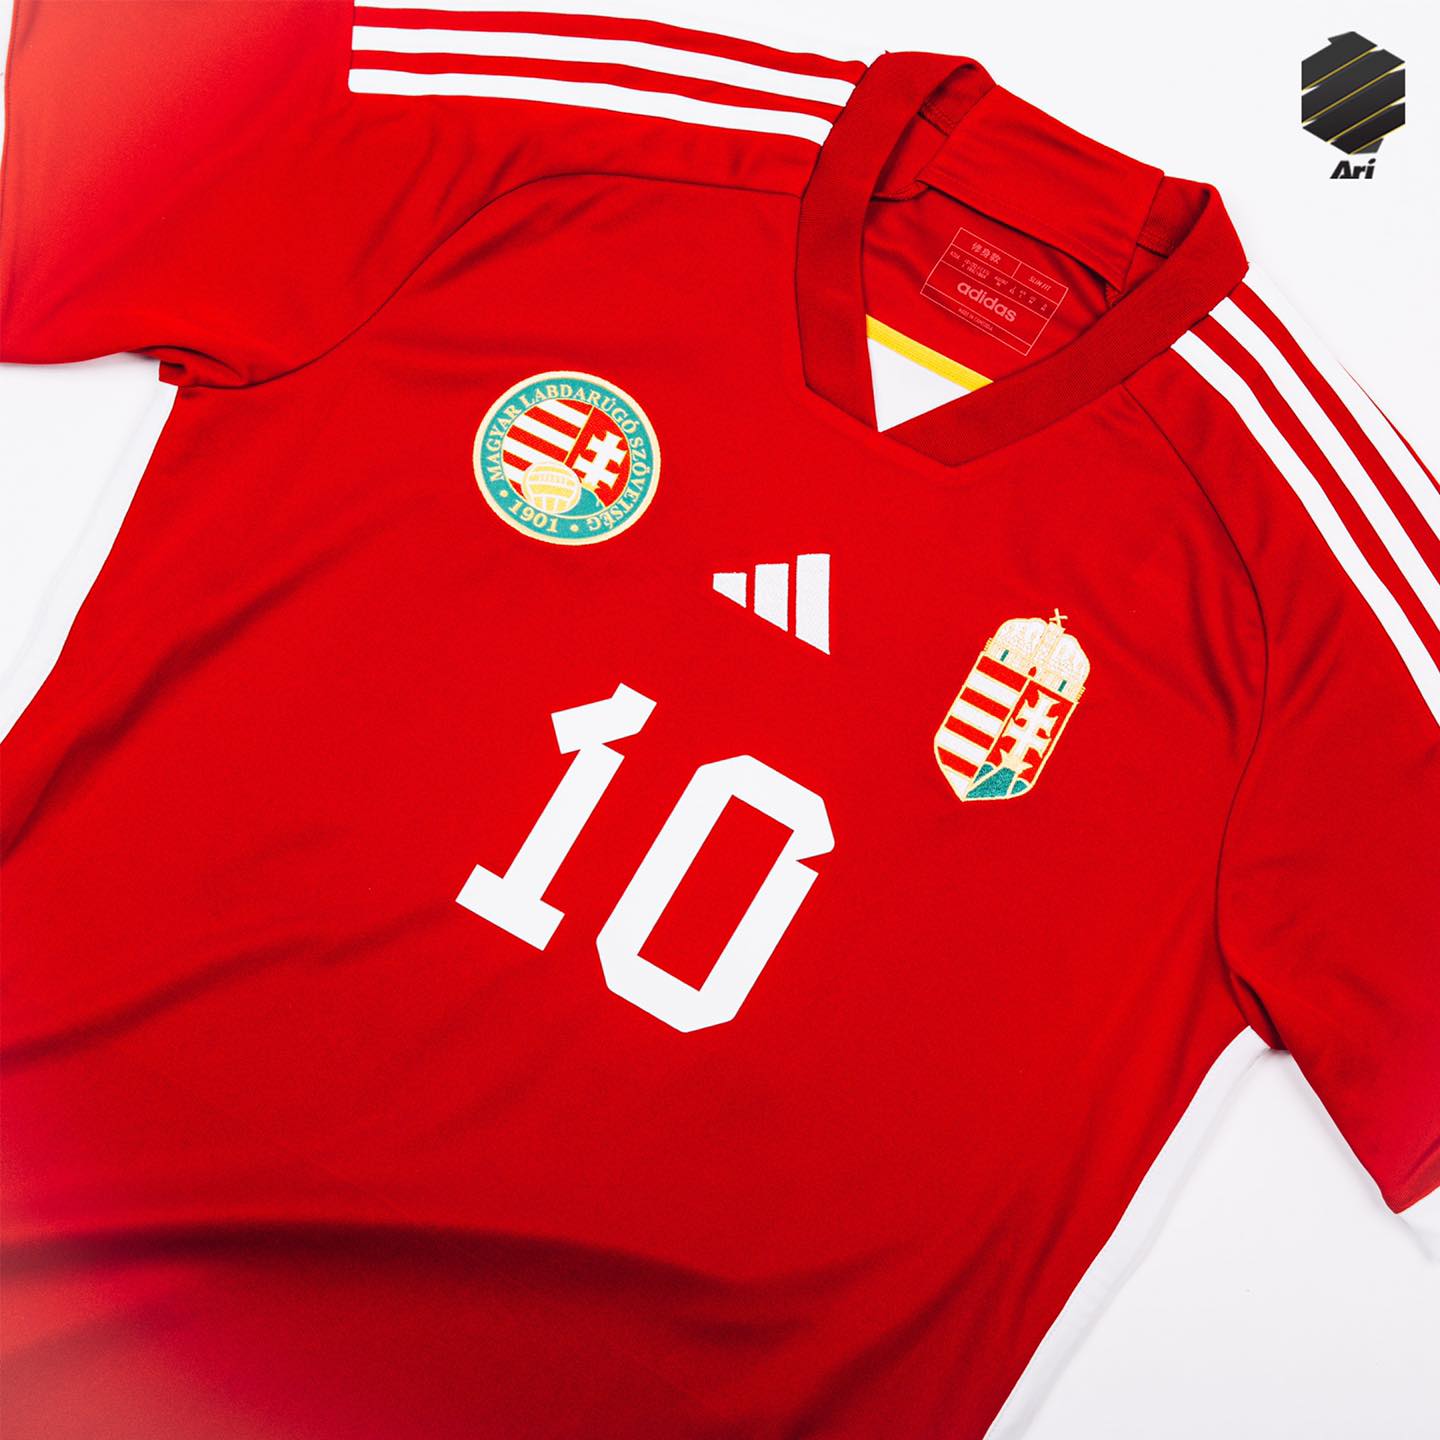 Odd: Germany Keep Old Font for 2022 World Cup Kits - Footy Headlines